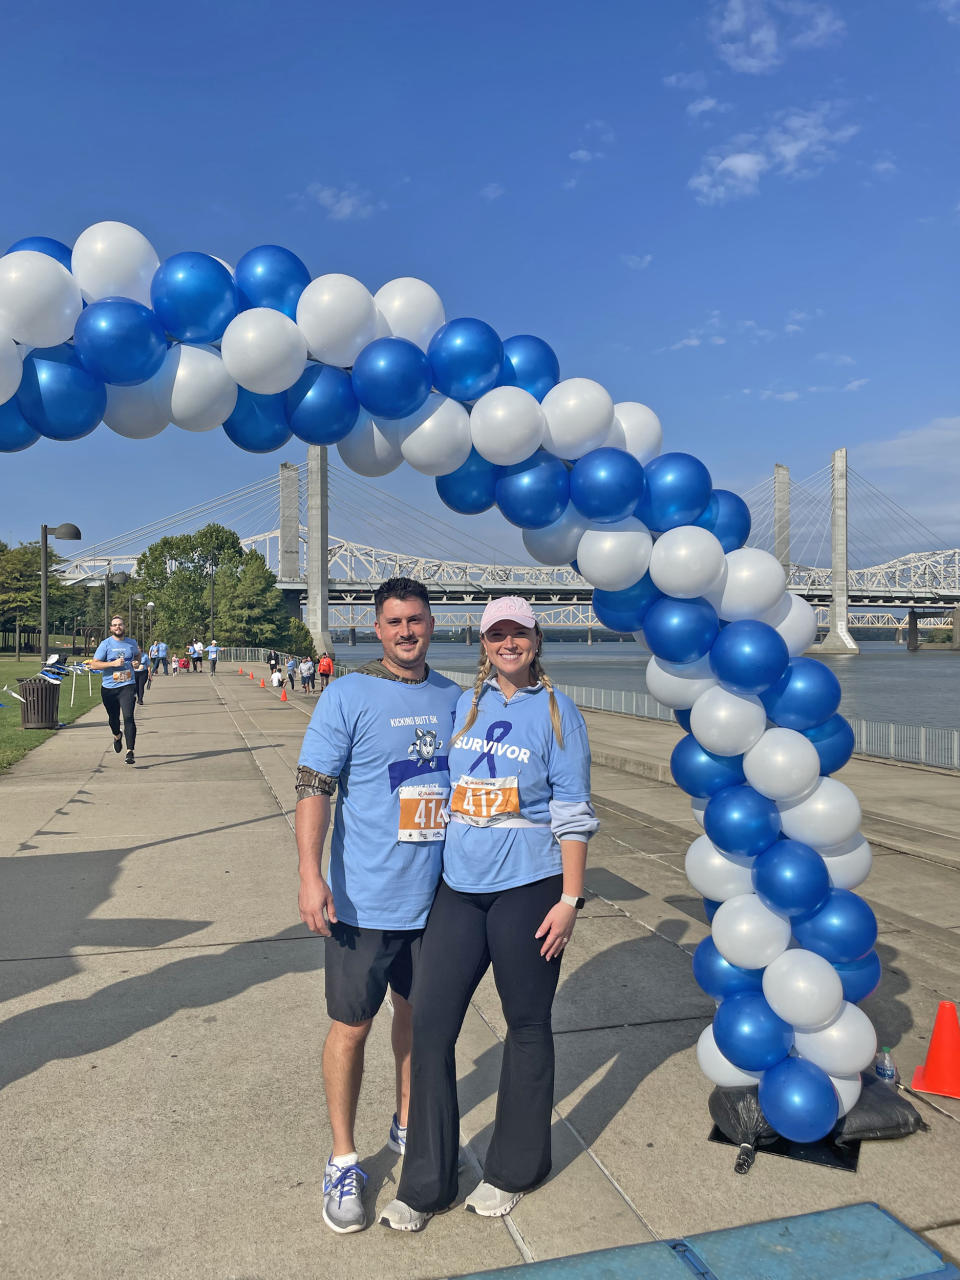 Barrett takes part in the Kicking Butt 5K in Louisville, Kentucky, to raise awareness about colon cancer. (Courtesy Carly Barrett)